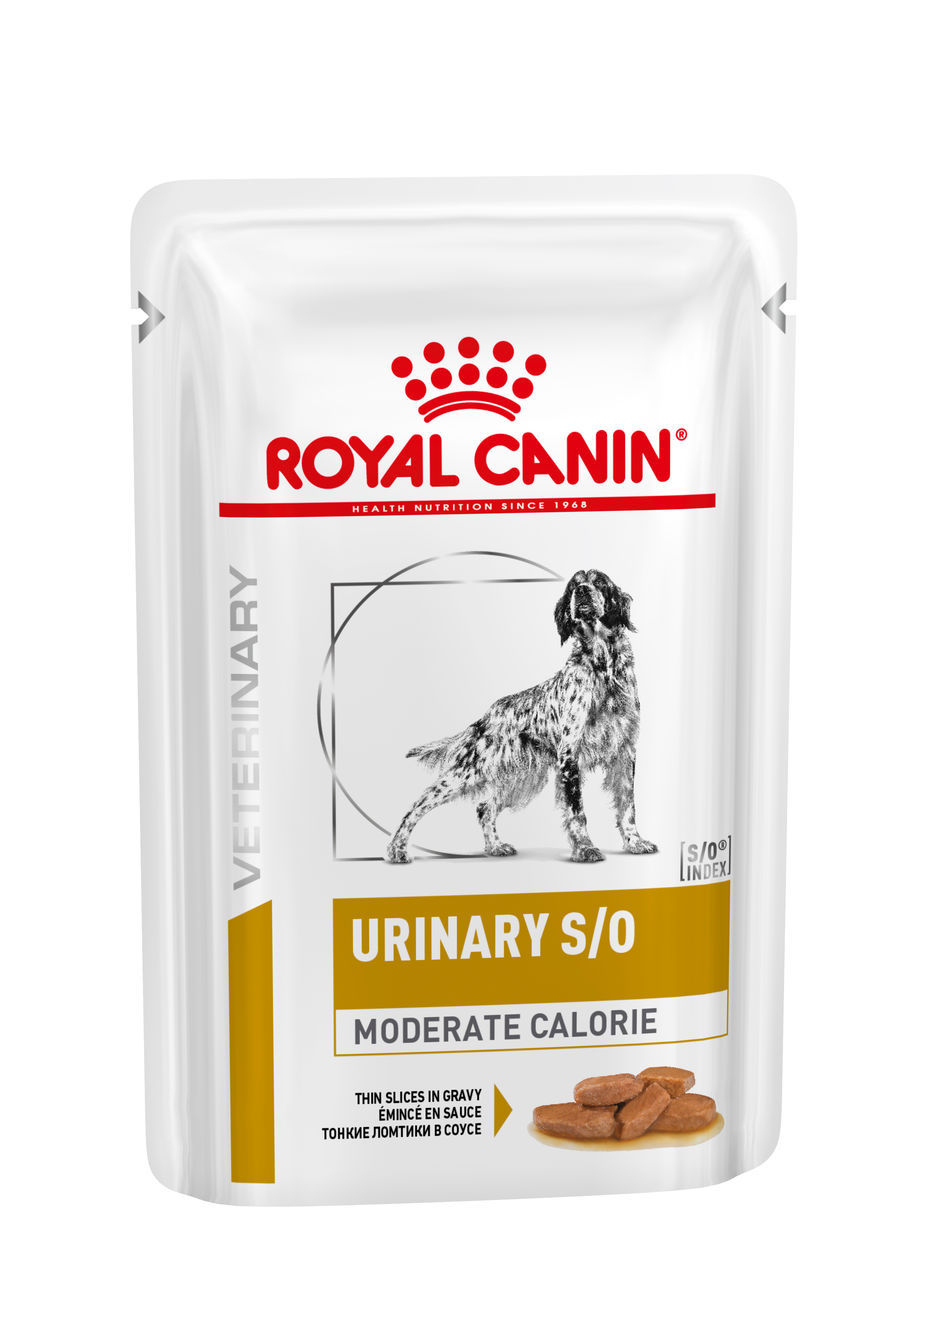 VHN Dog Wet Urinary Mod Cal 100gr Pouch   Adulto Perro Royal Canin